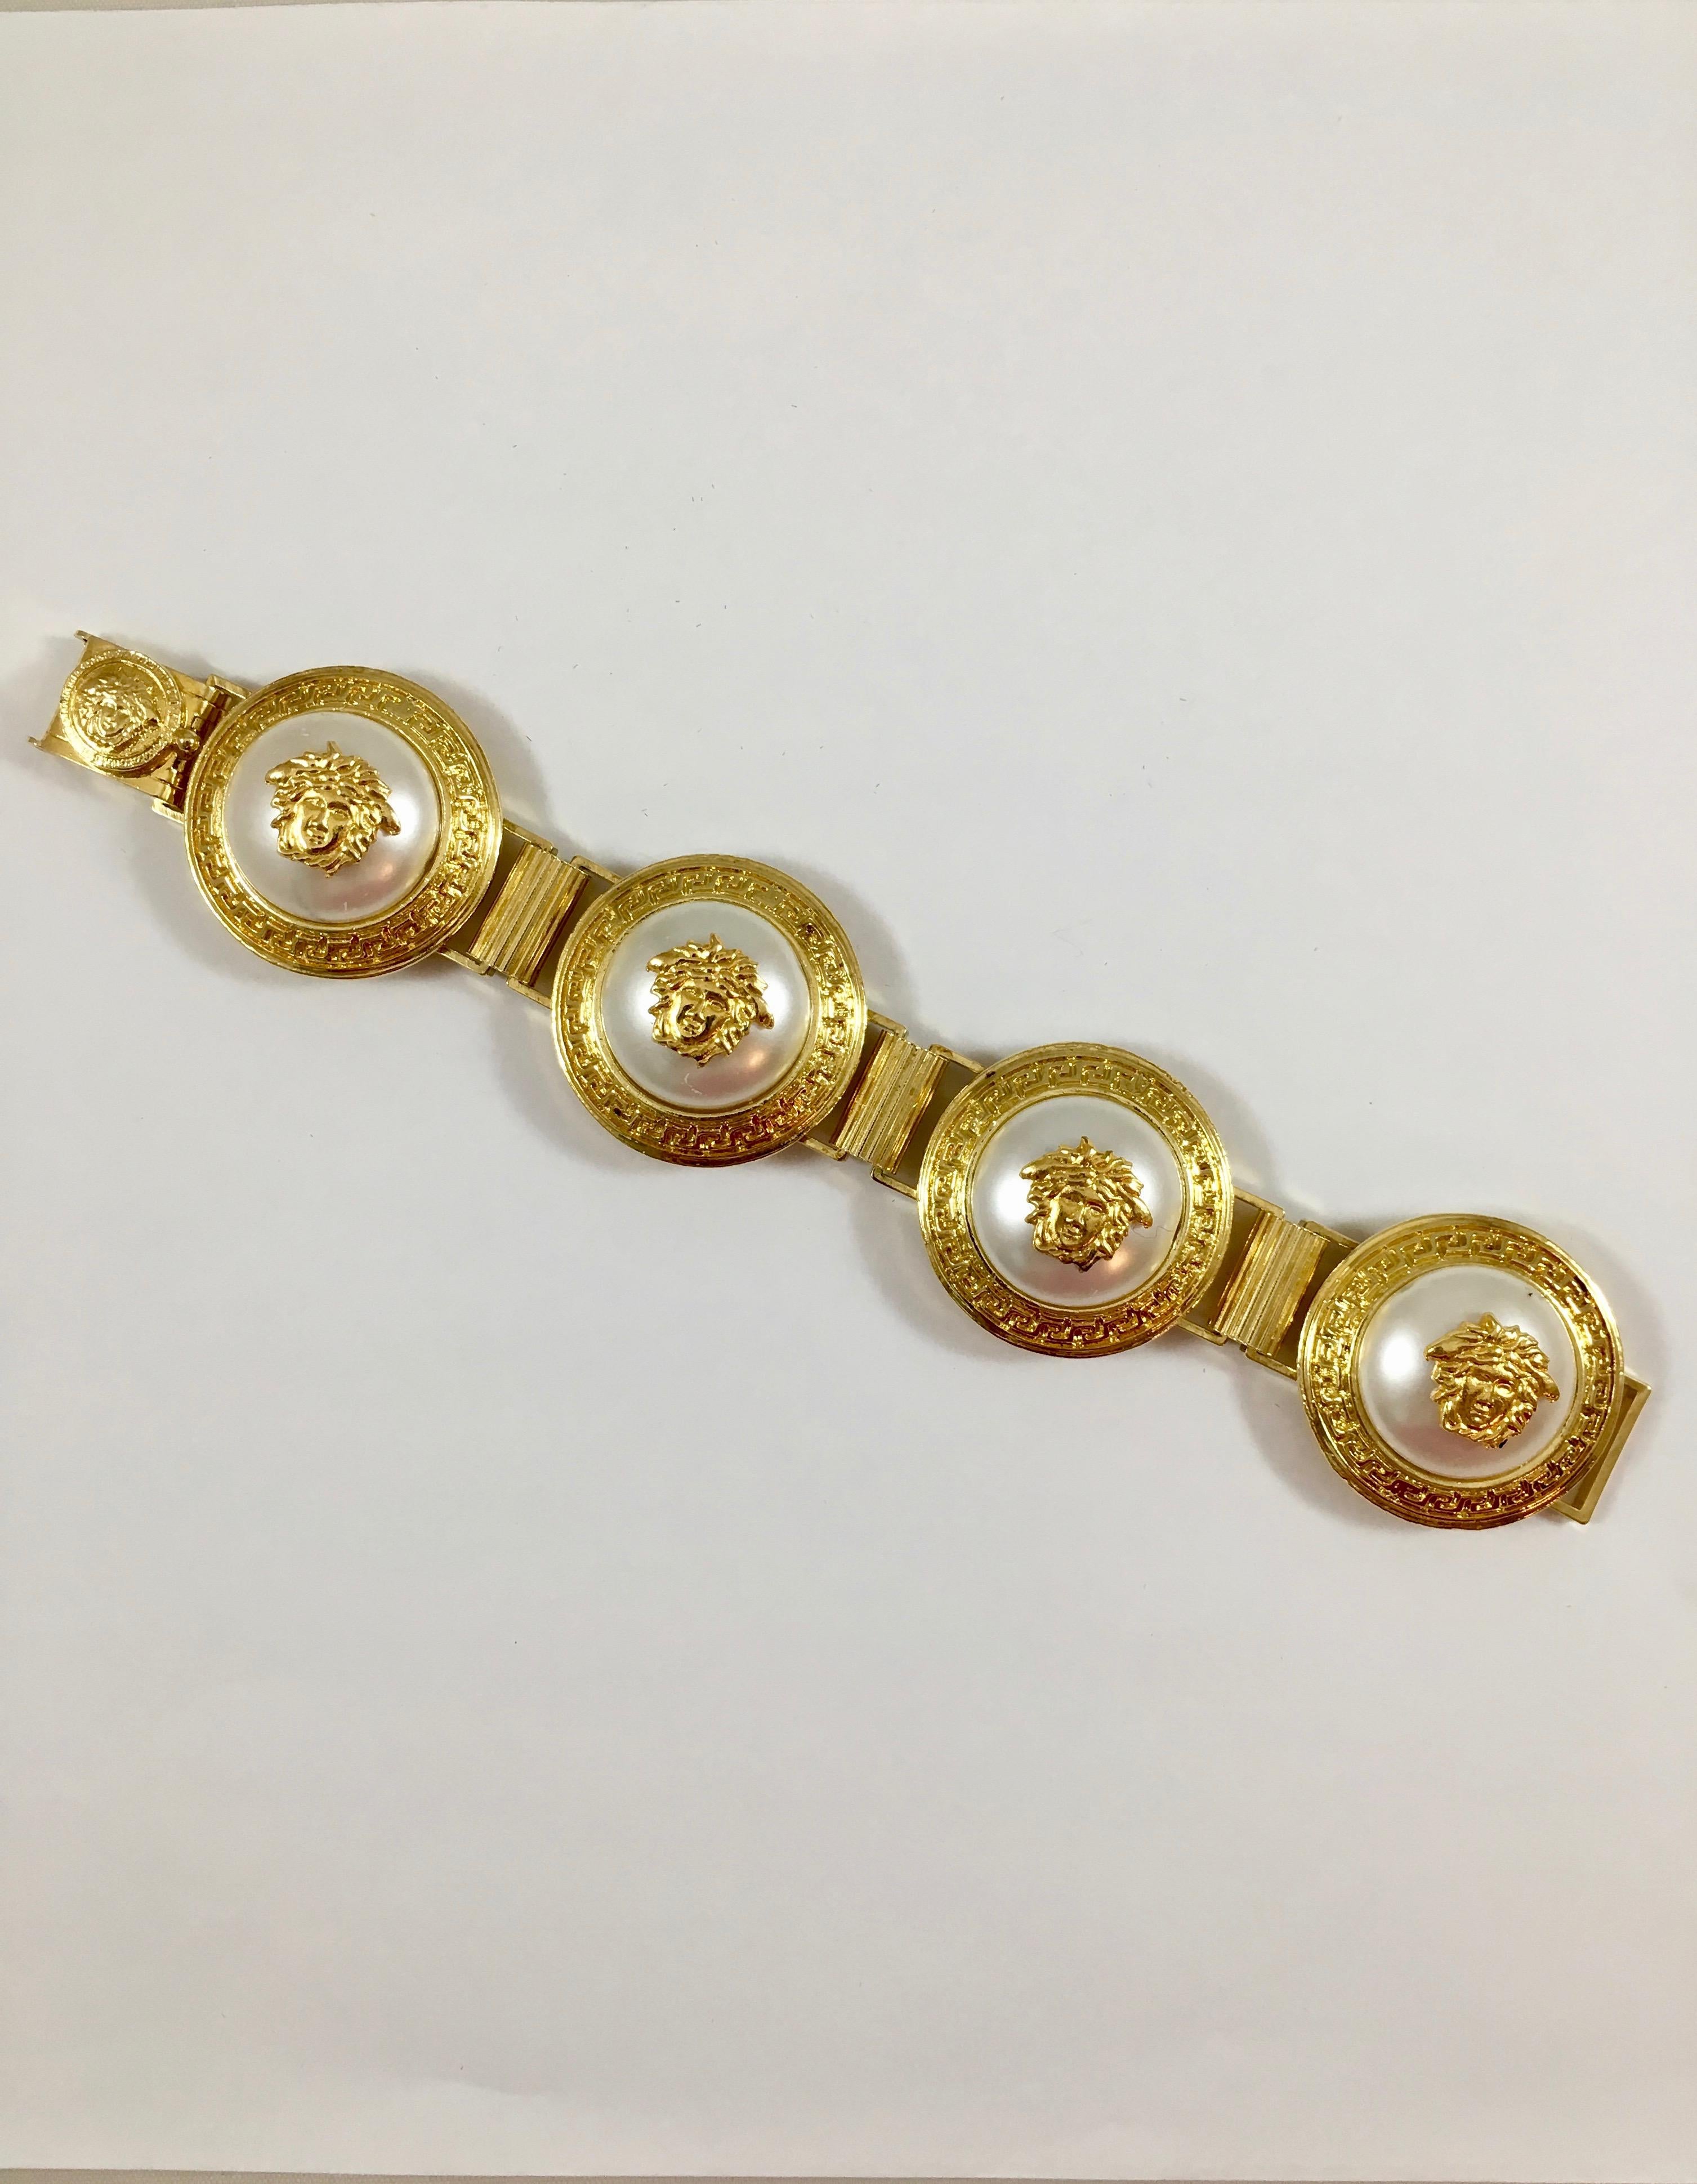 This is a wonderful Versace bracelet featuring four large faux pearl medallions with Medusa heads and gold-tone links. It fastens with a clasp with a Medusa head on it. It is signed in a plaque on the back of the bracelet which reads, 'Gianni